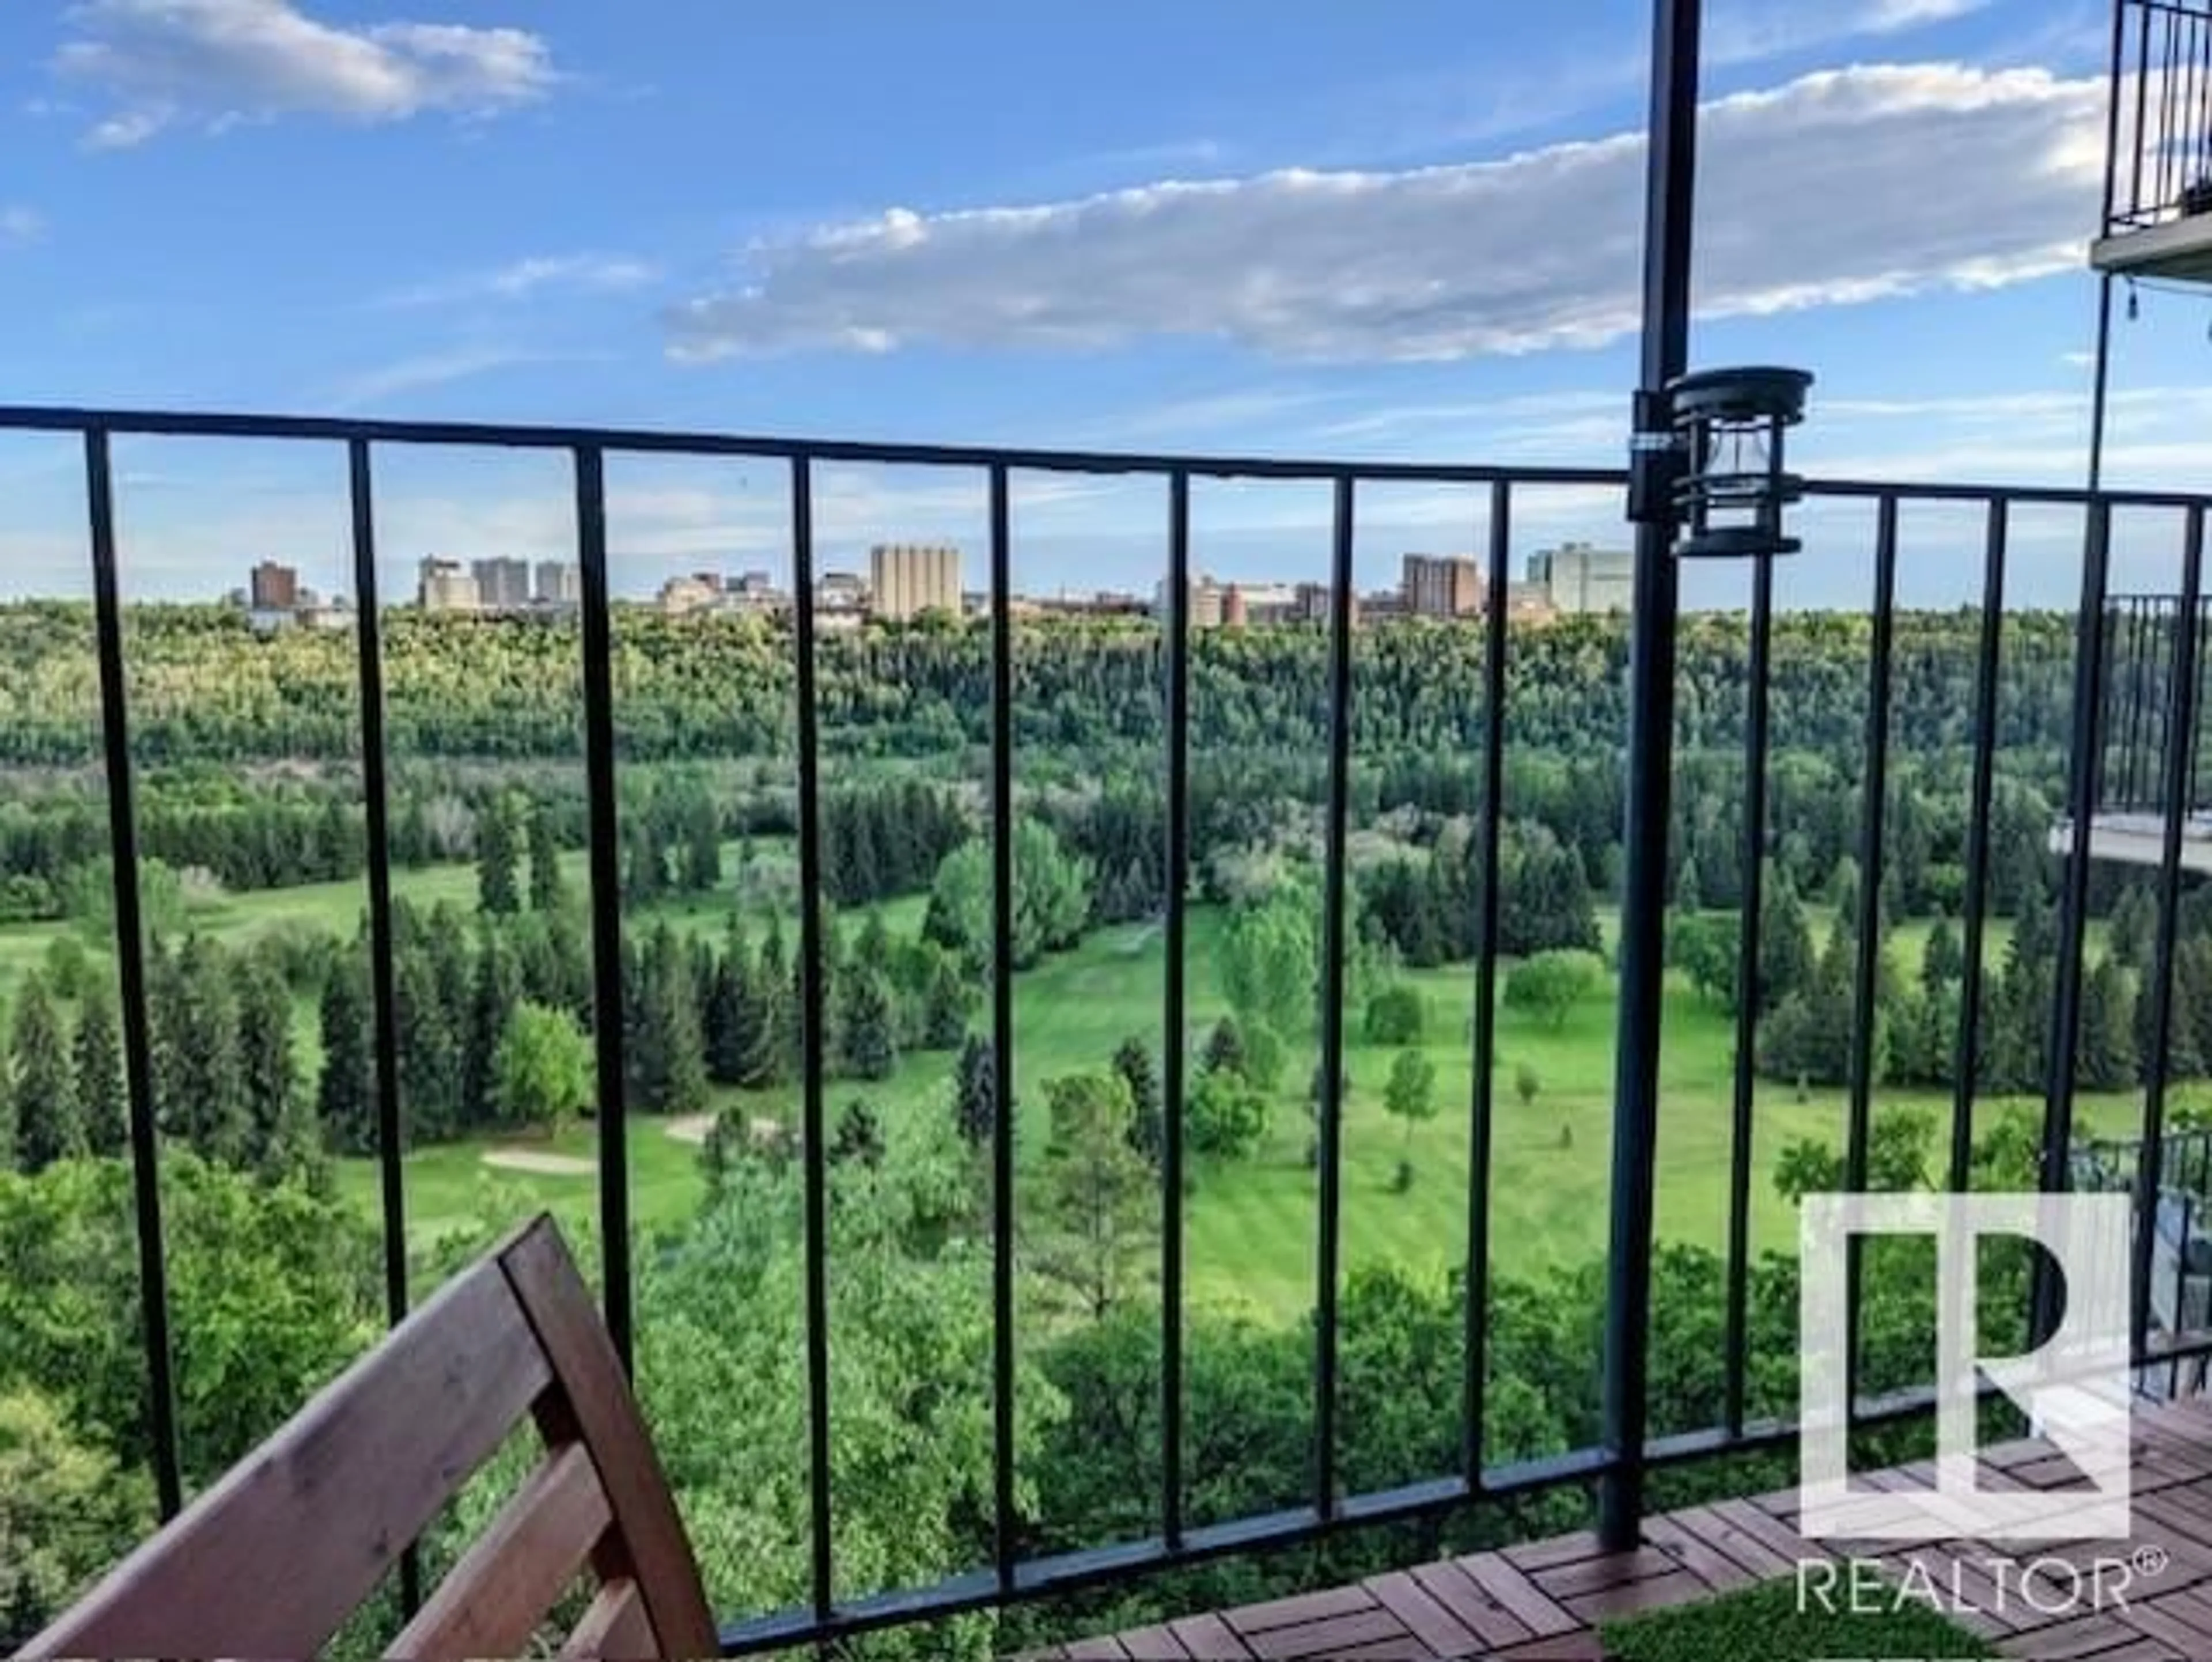 Balcony in the apartment for #601 9908 114 ST NW, Edmonton Alberta T5K1R1